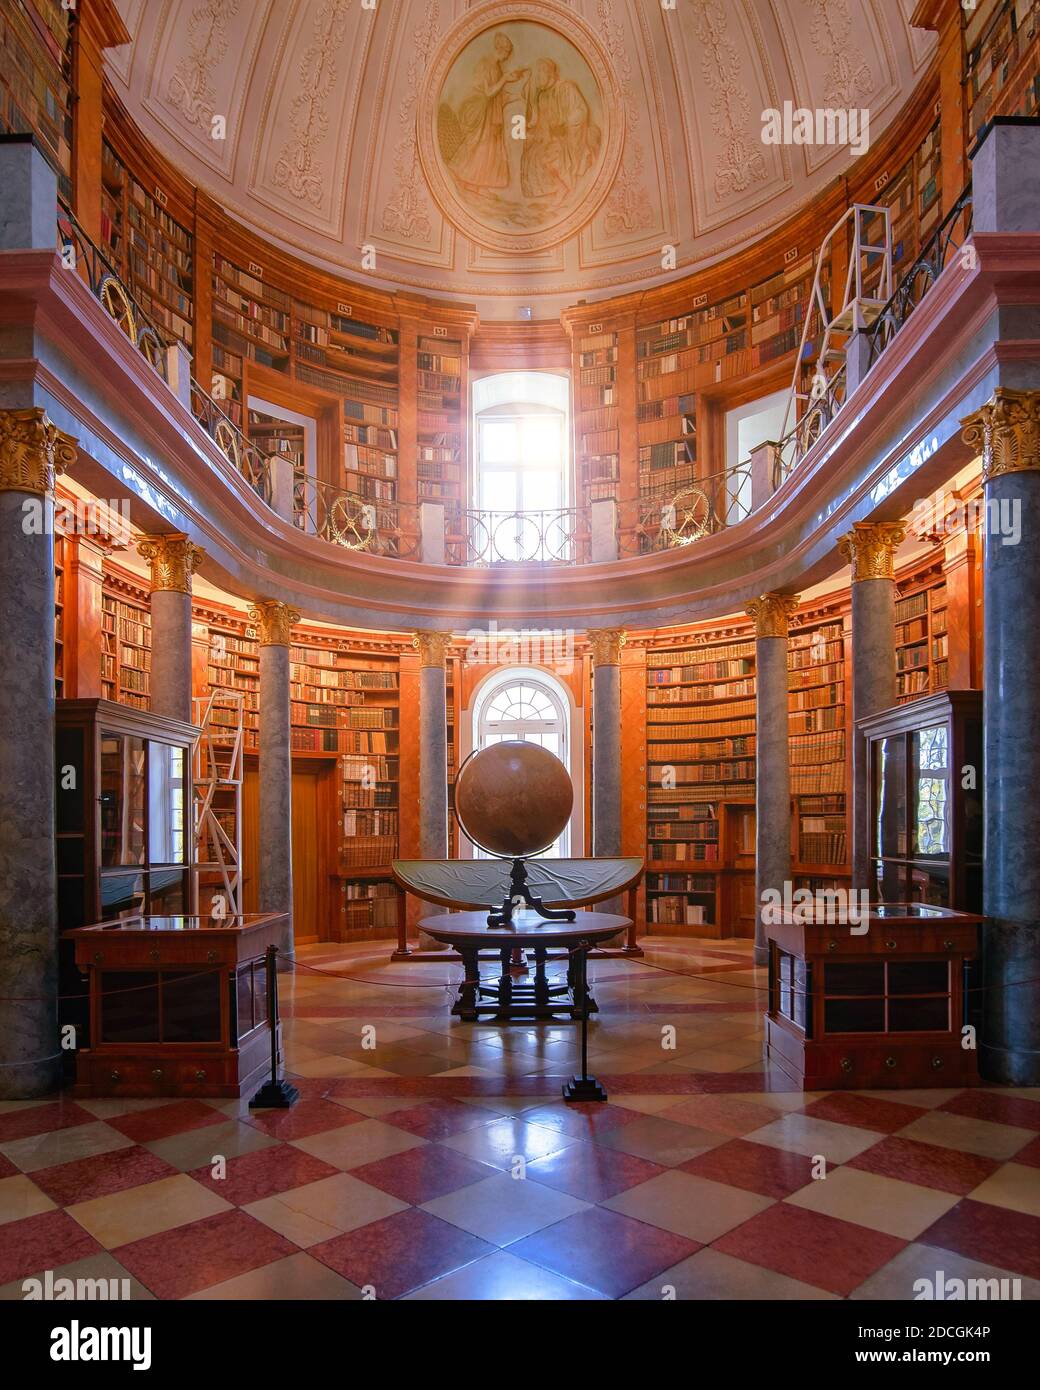 Library of Pannonhalma Archabbey in Hungary. Amazing frescos old wood book shelfs and much more historical religious  relicvies Stock Photo